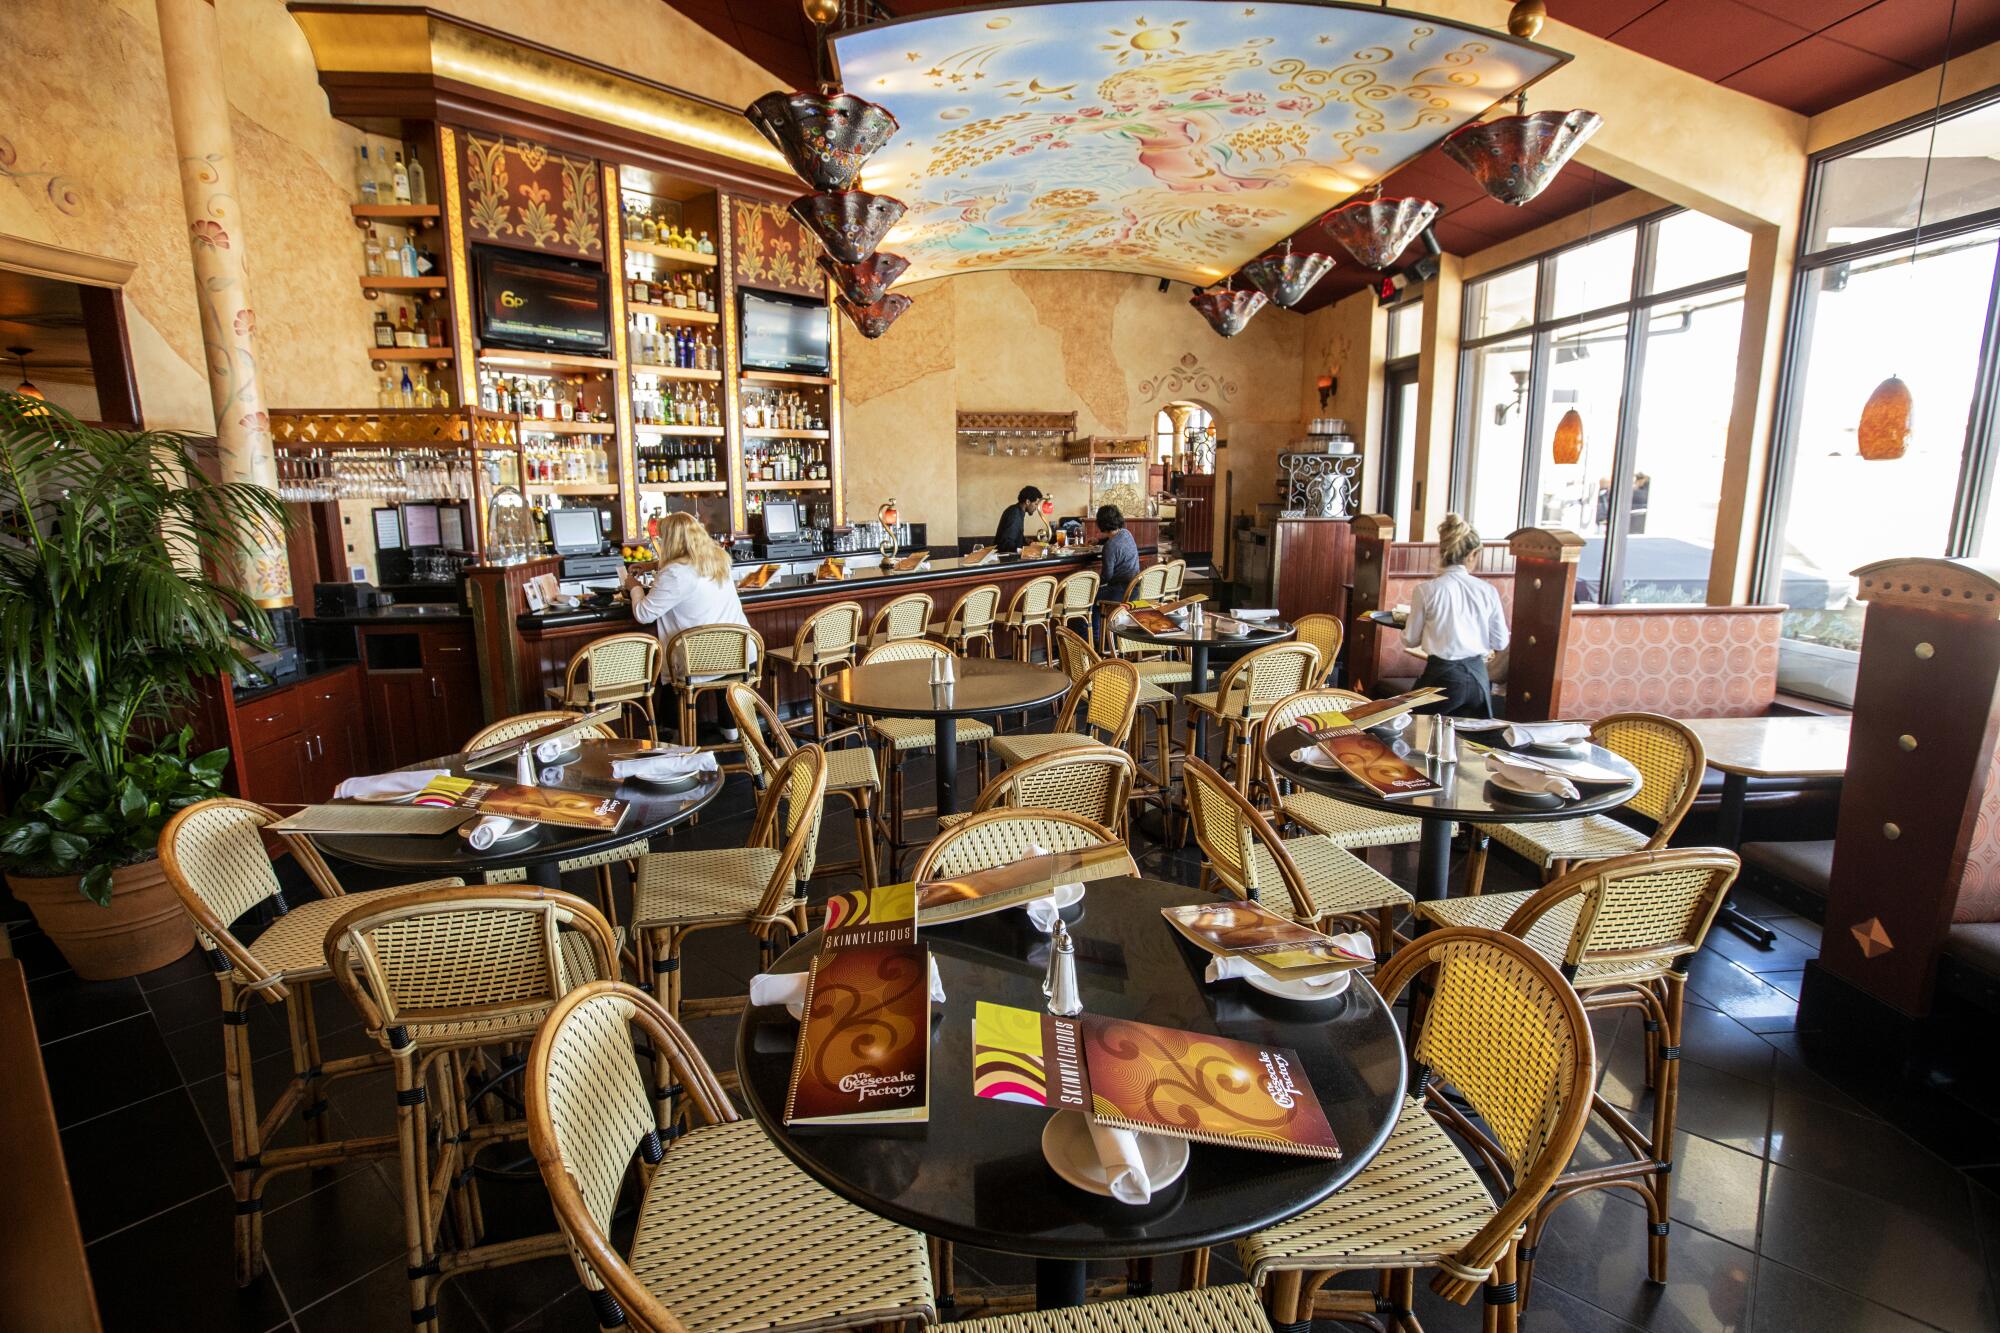 The bar-area dining room at the Cheesecake Factory restaurant in Marina del Rey.